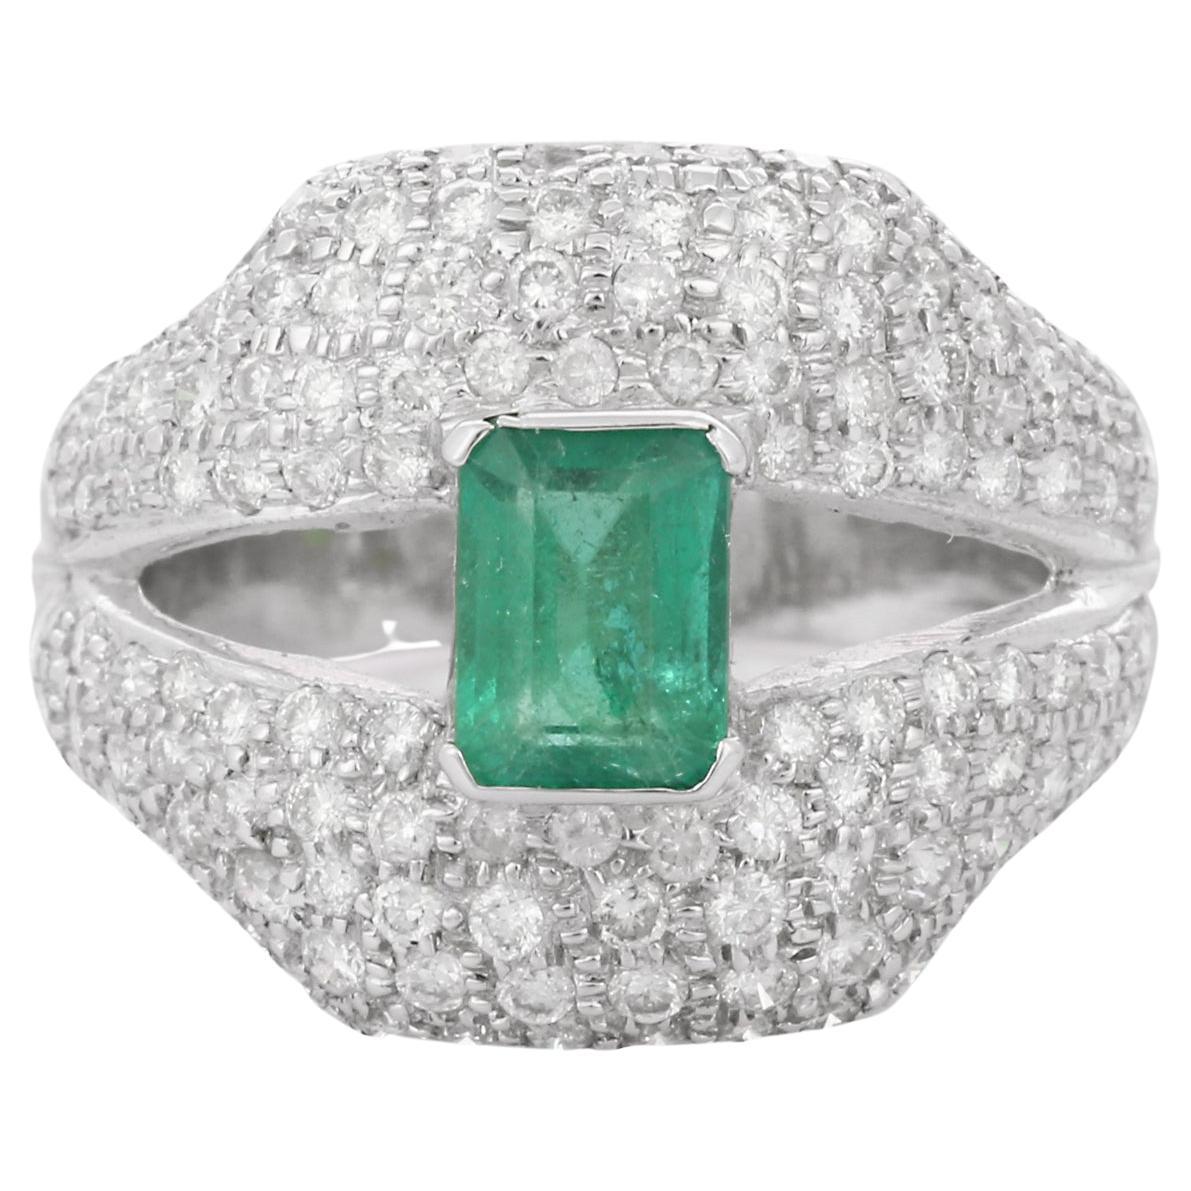 Regal Diamond and Emerald Split Shank Cocktail Ring in 18K White Gold